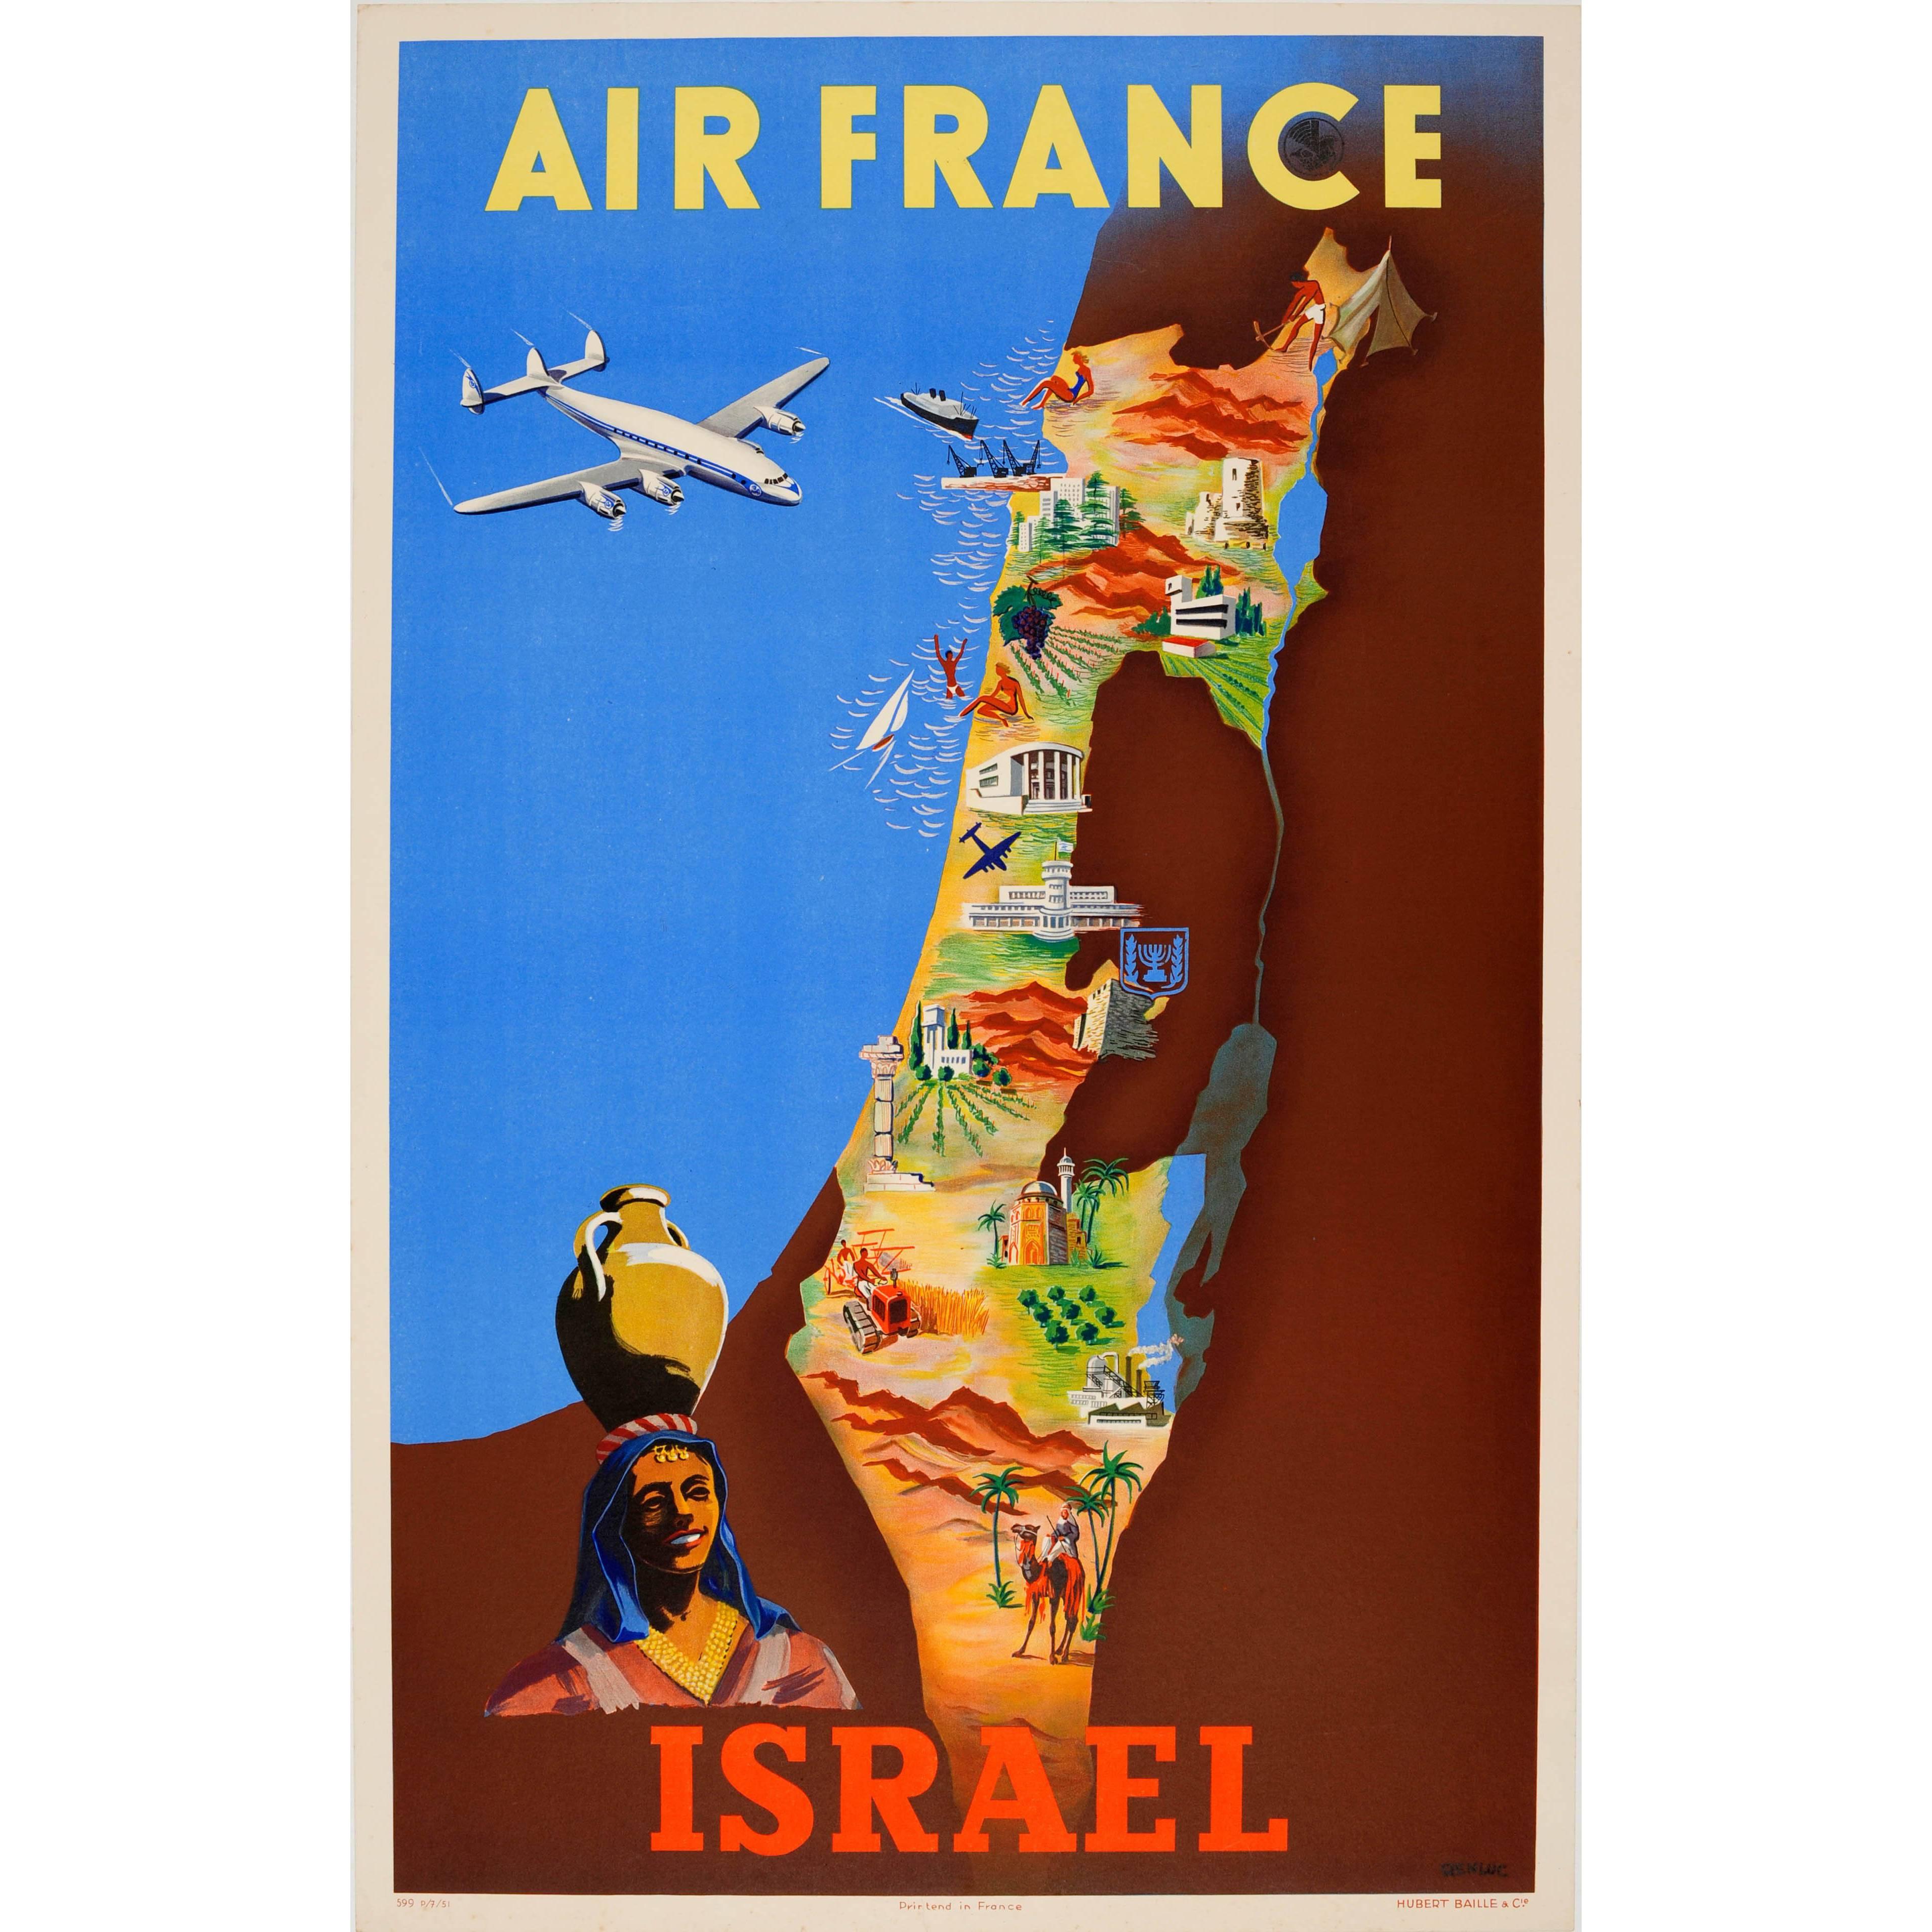 Original Vintage Colourful Travel Map Poster by Renluc for Air France Israel